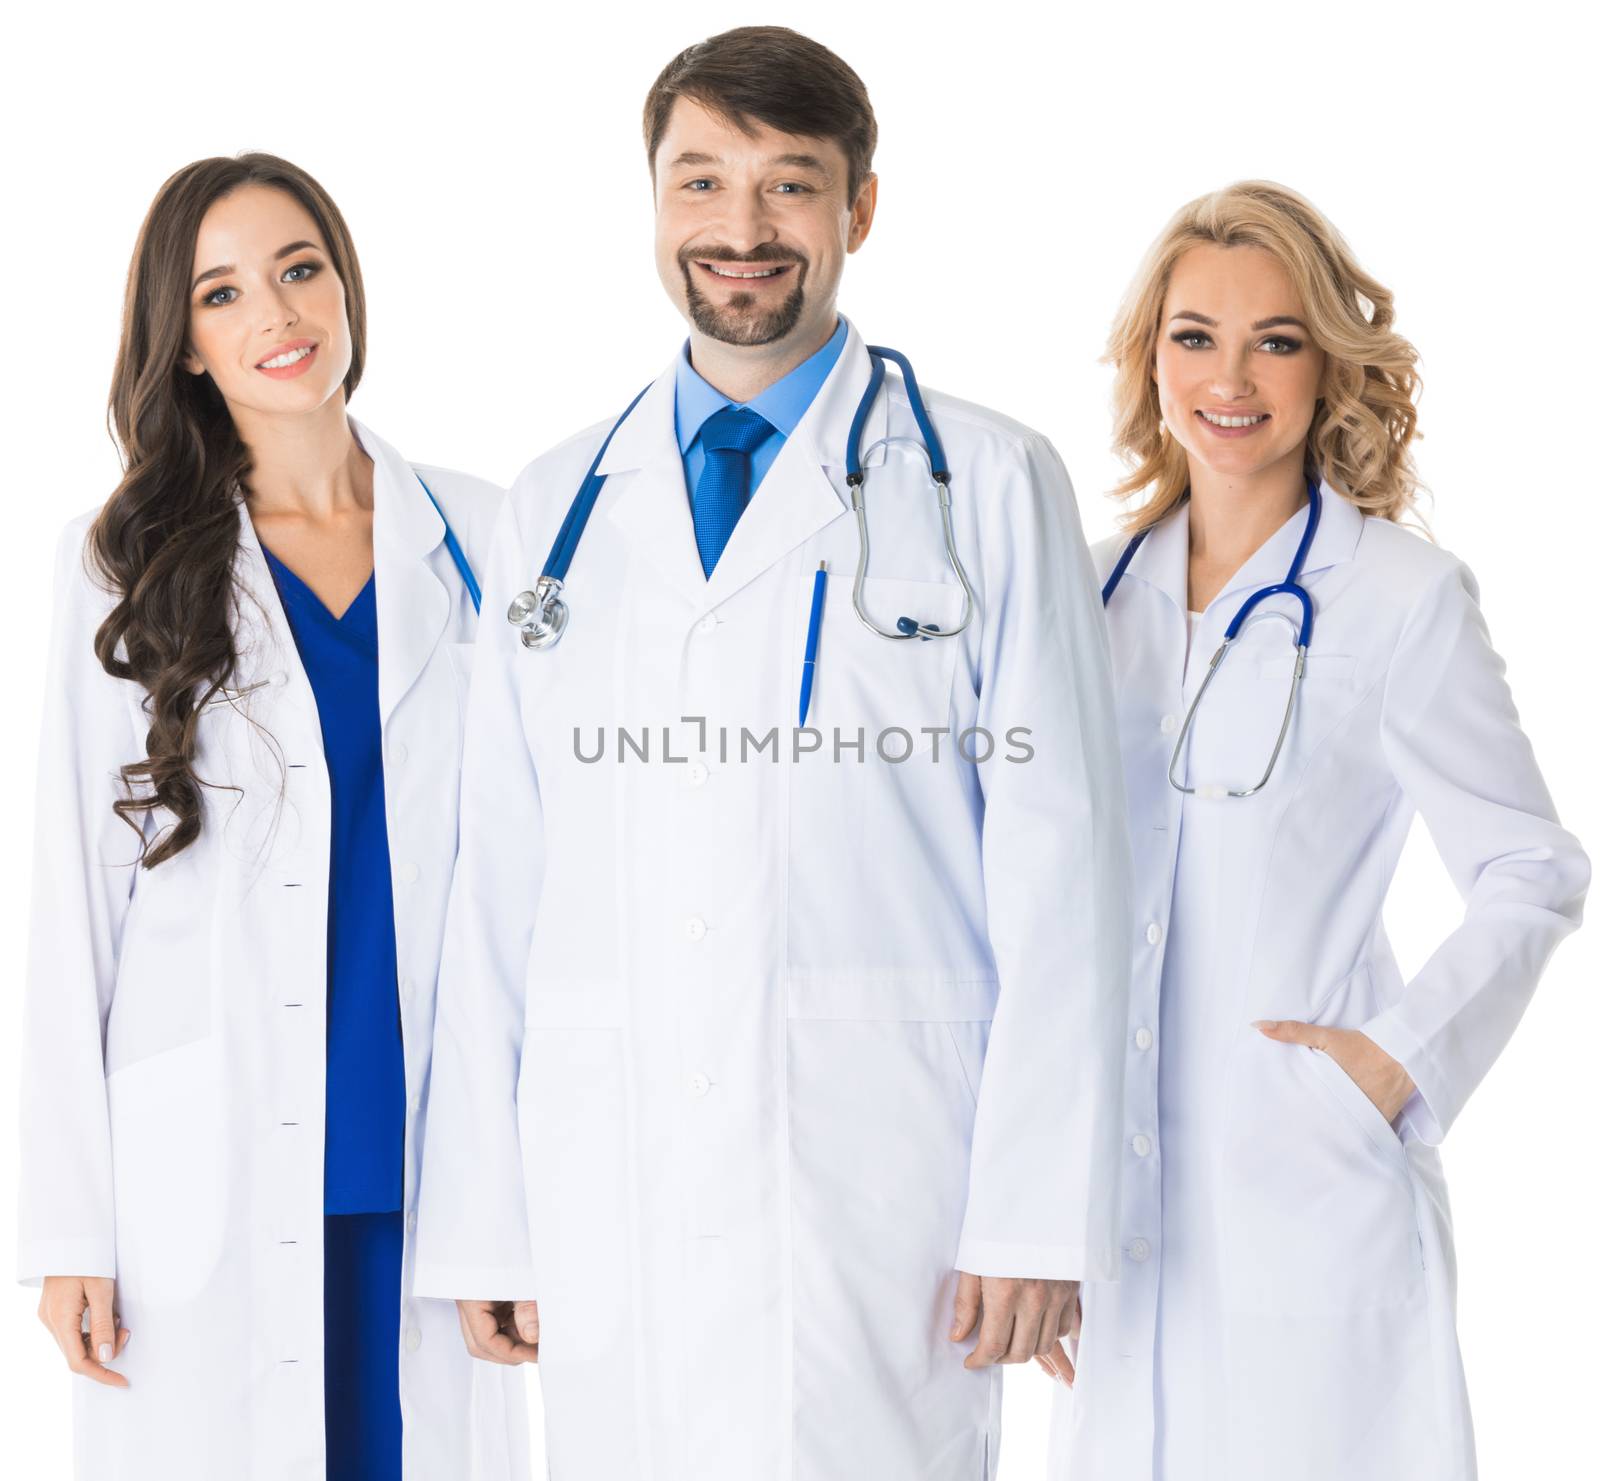 Medical doctors group isolated on white background